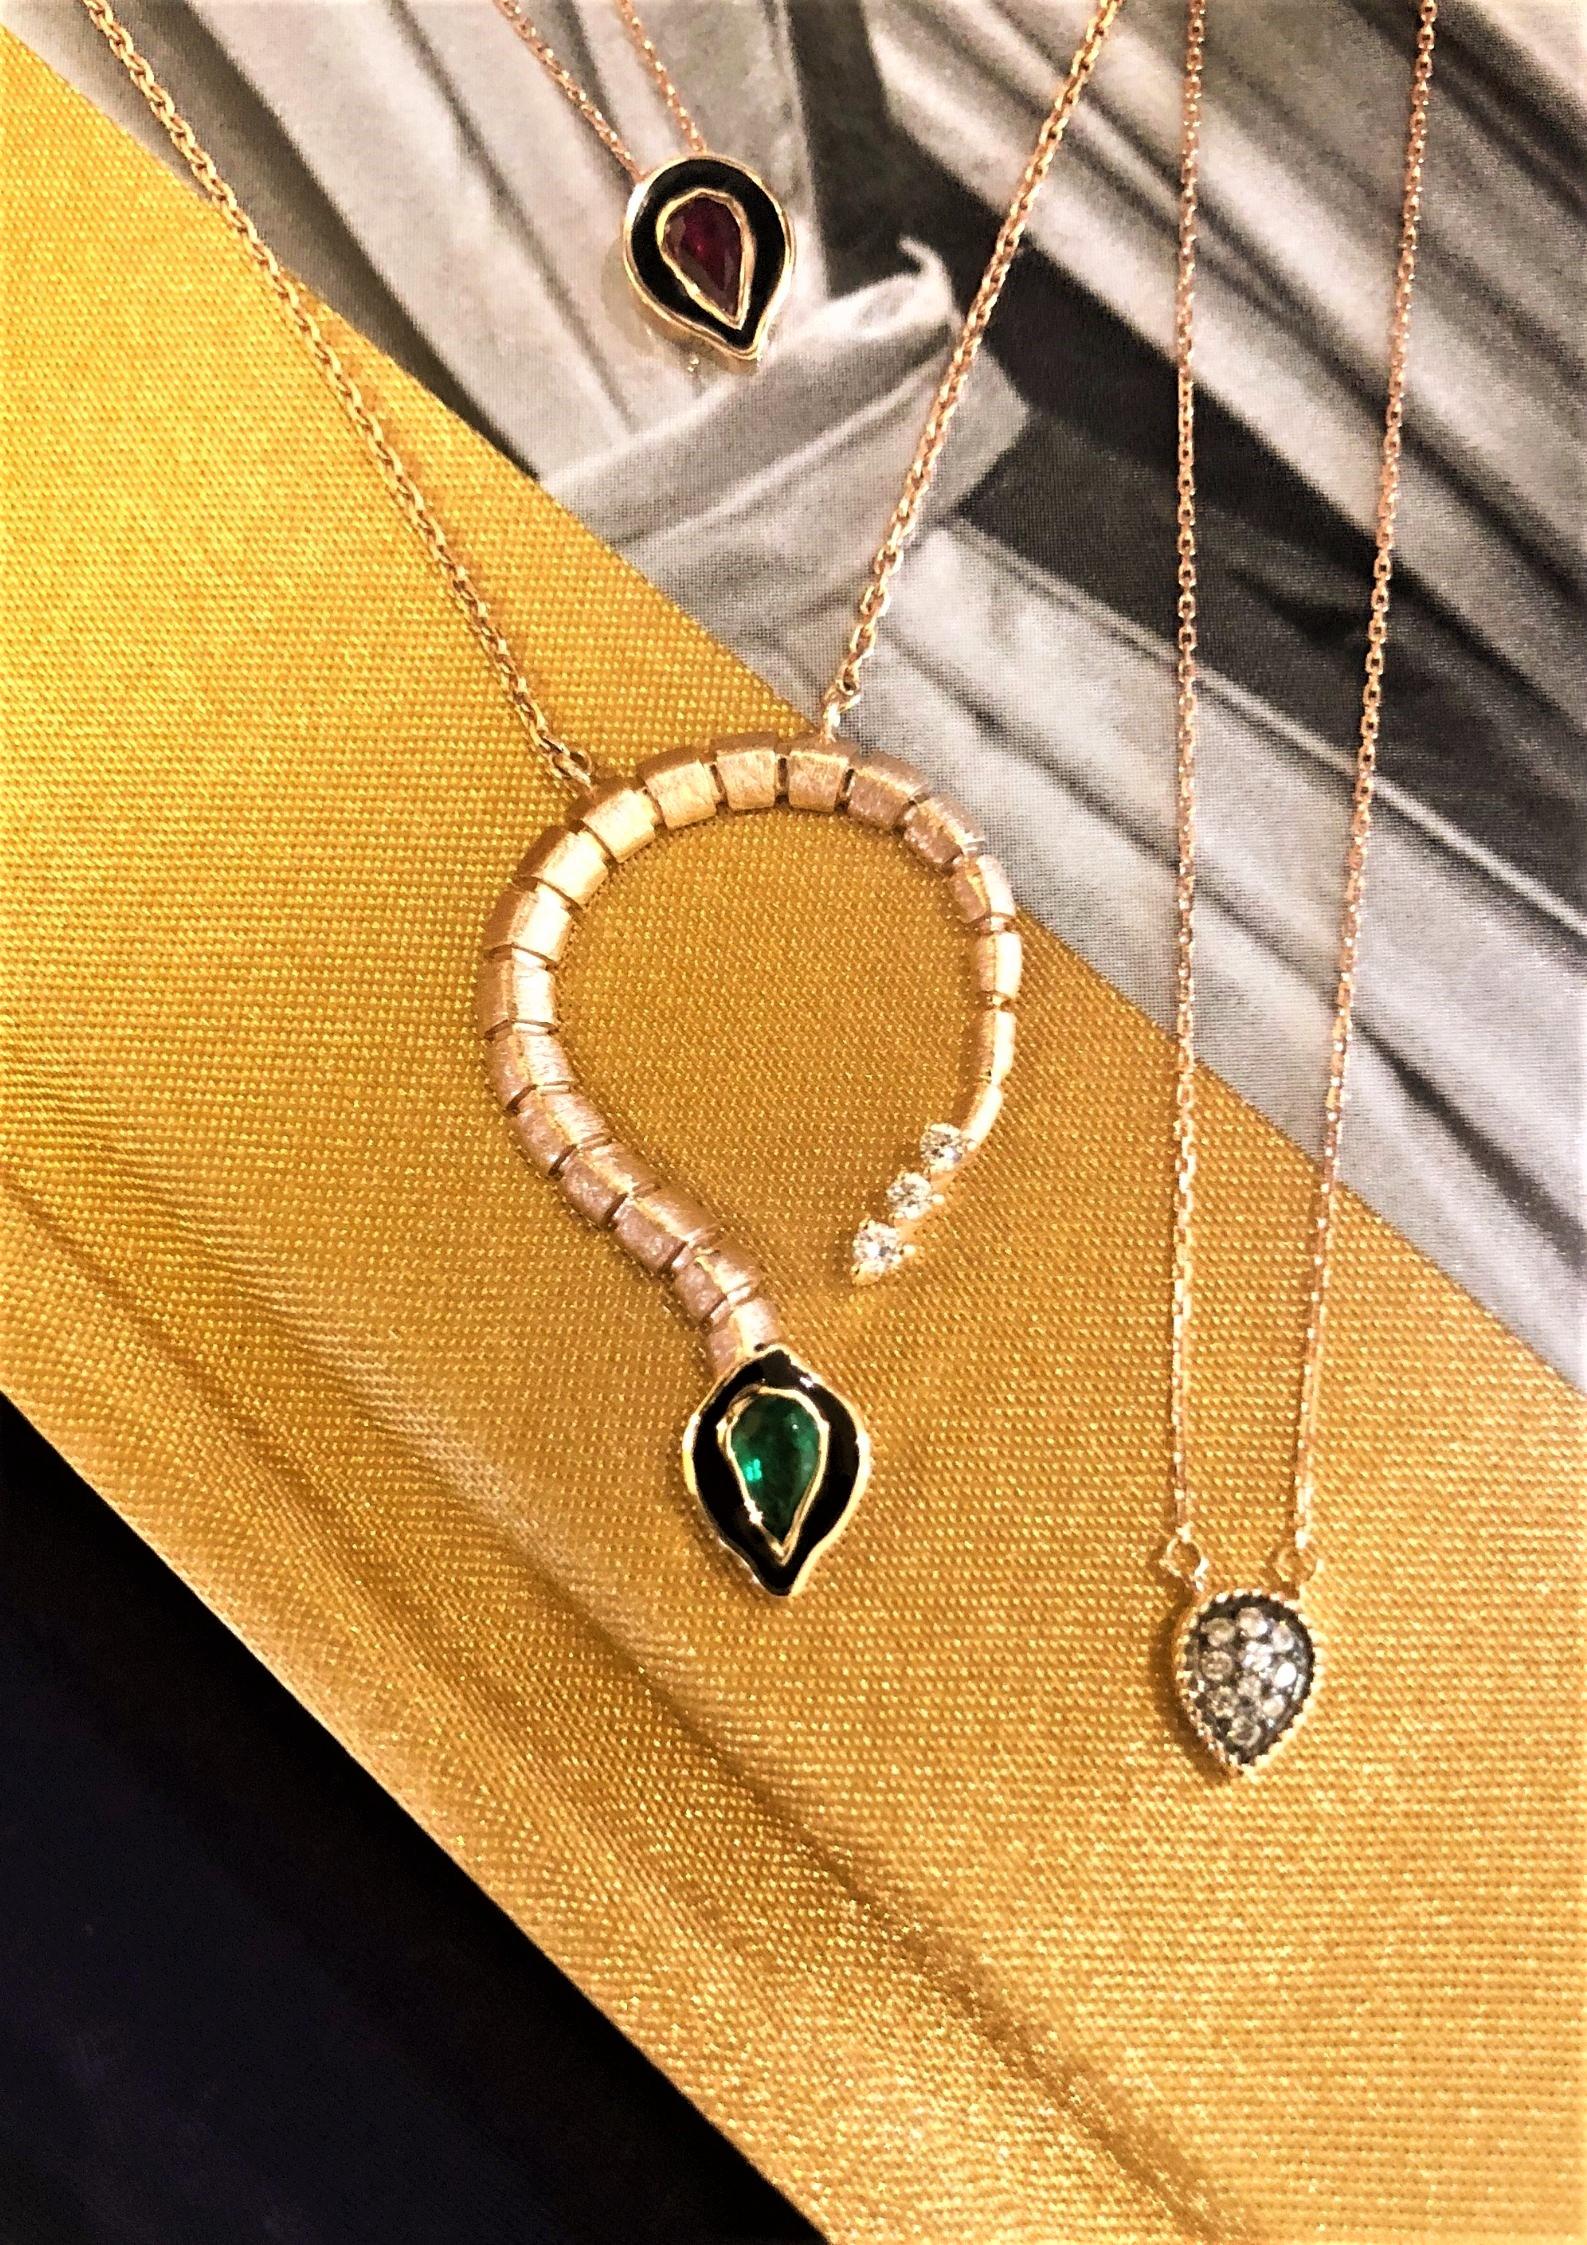 Baby dragon necklace in 14k rose gold with 0.21ct emerald by Selda Jewellery

Additional Information:-
Collection: Dragon lady collection
14K Rose gold
0.06ct White diamond
0.21ct Emerald
Pendant height 3cm
Chain length 45cm